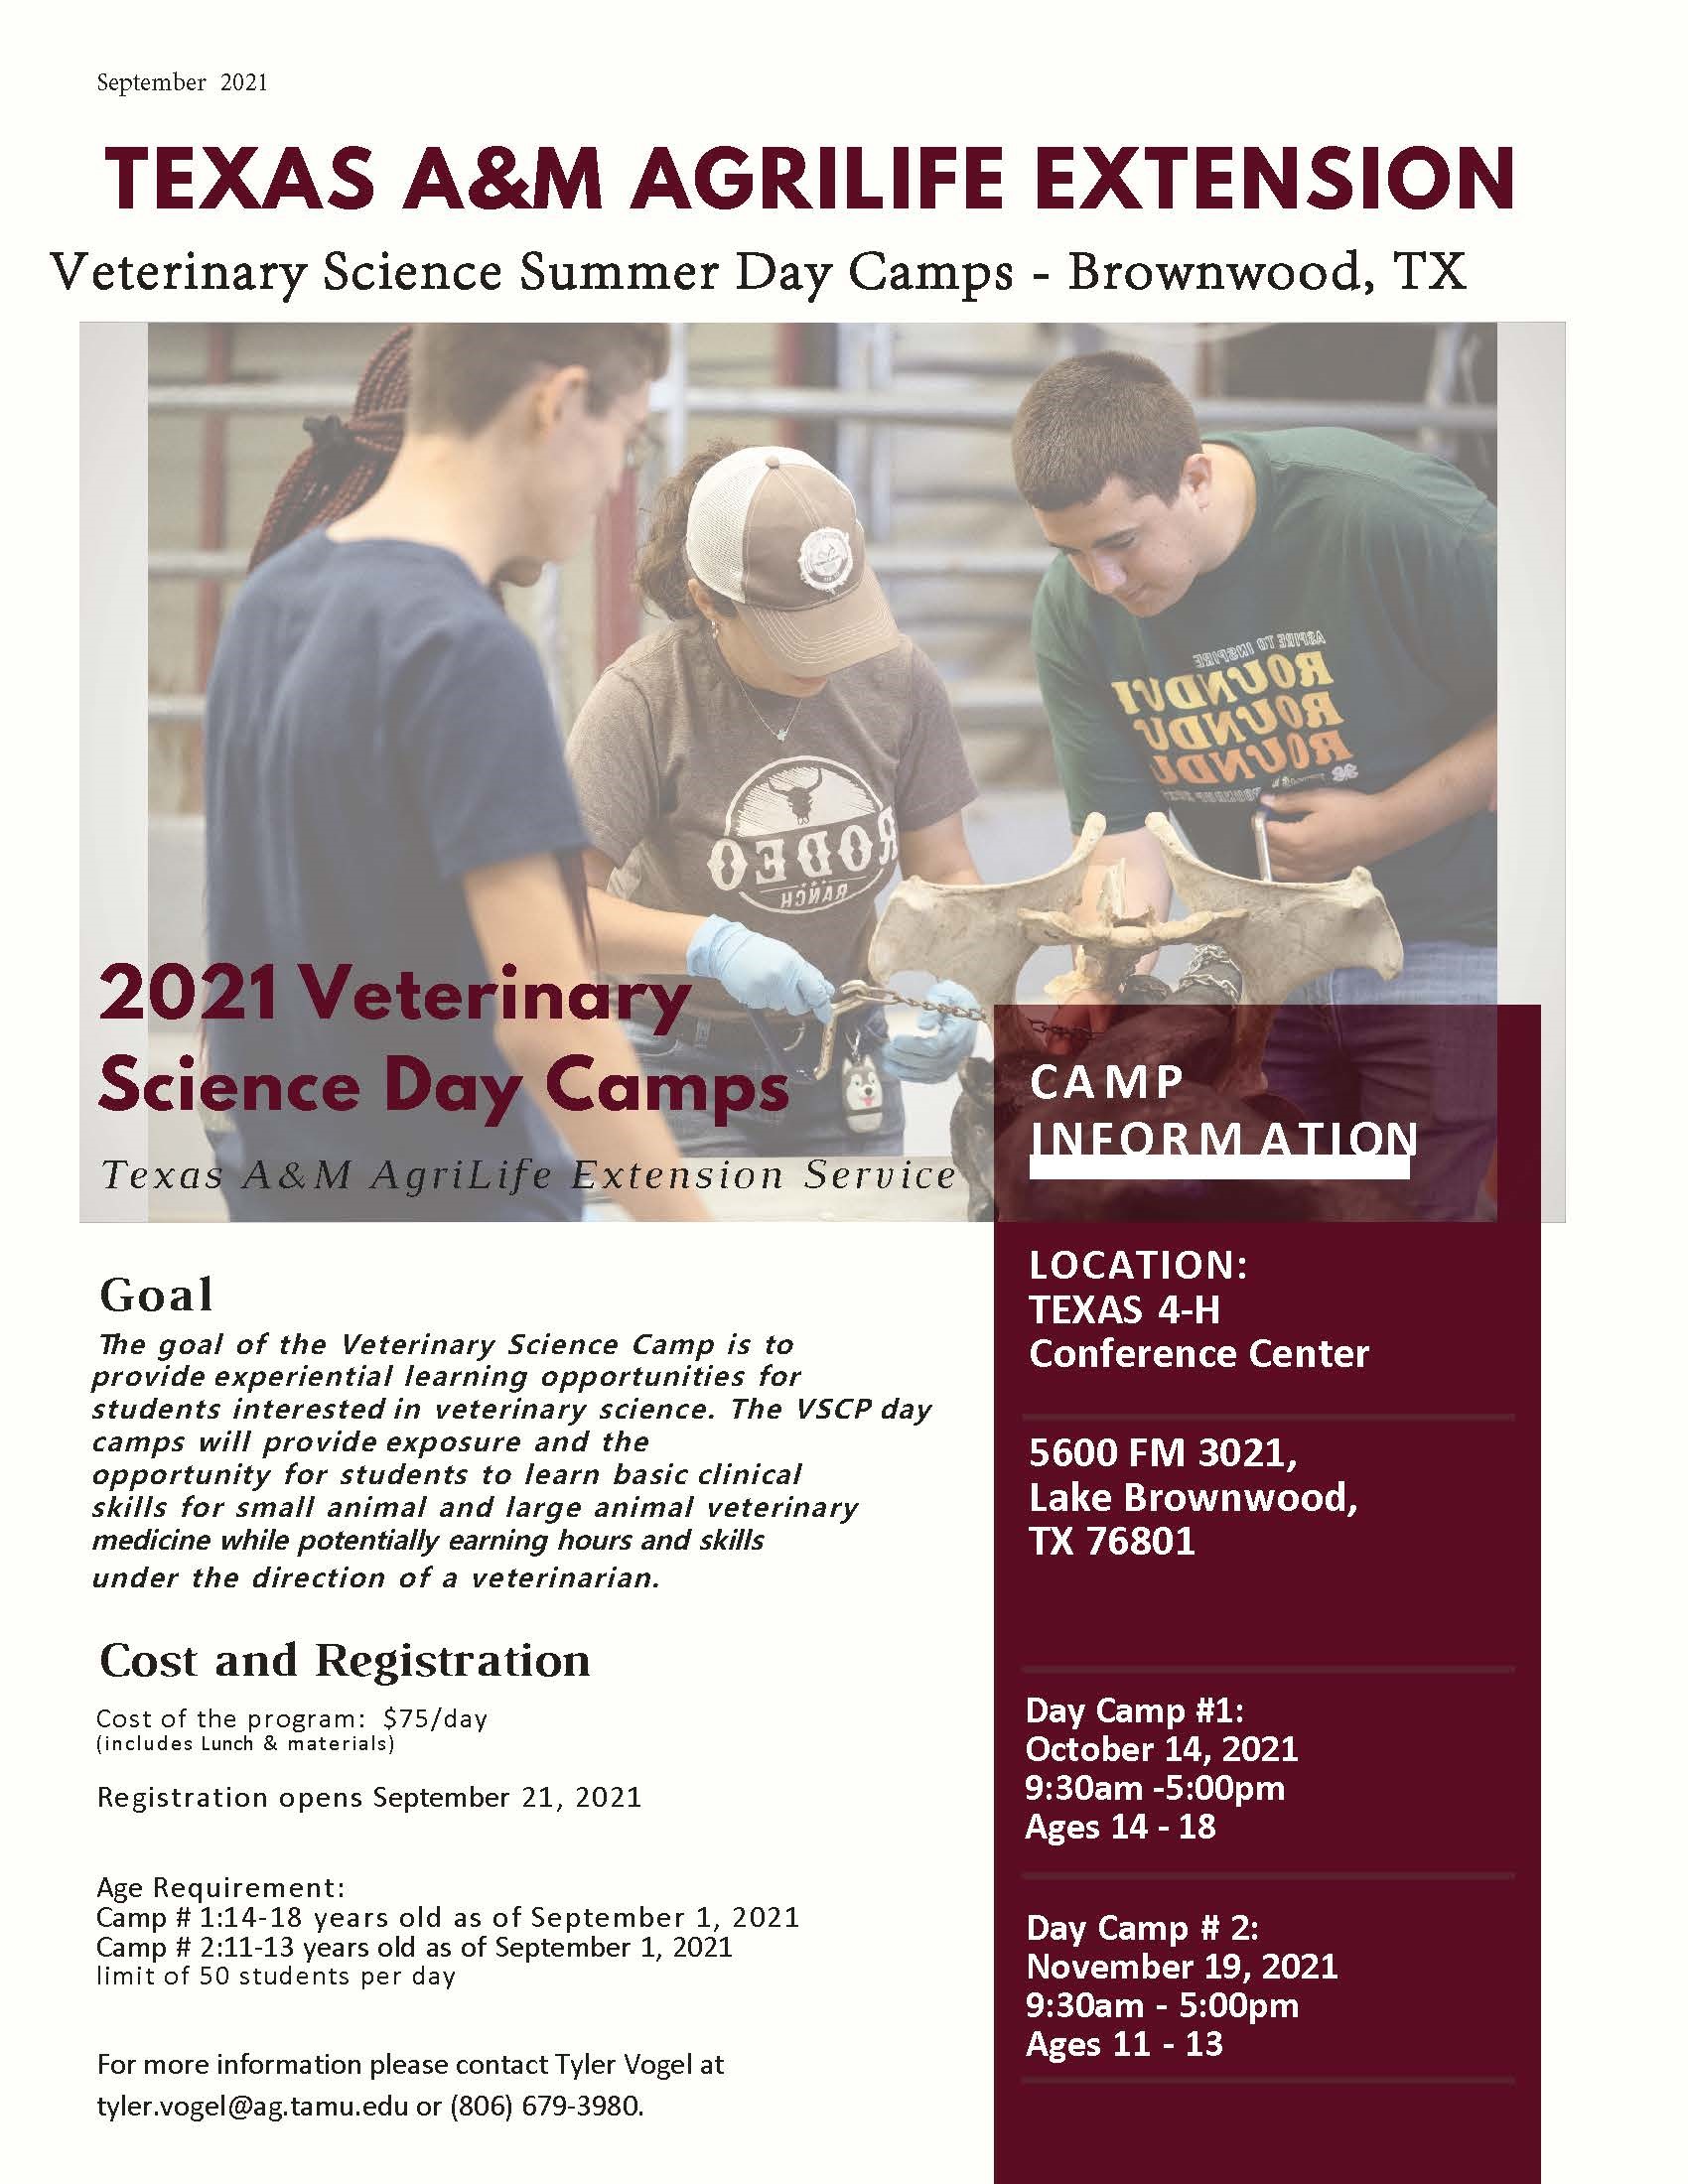 Veterinary Science Day Camps